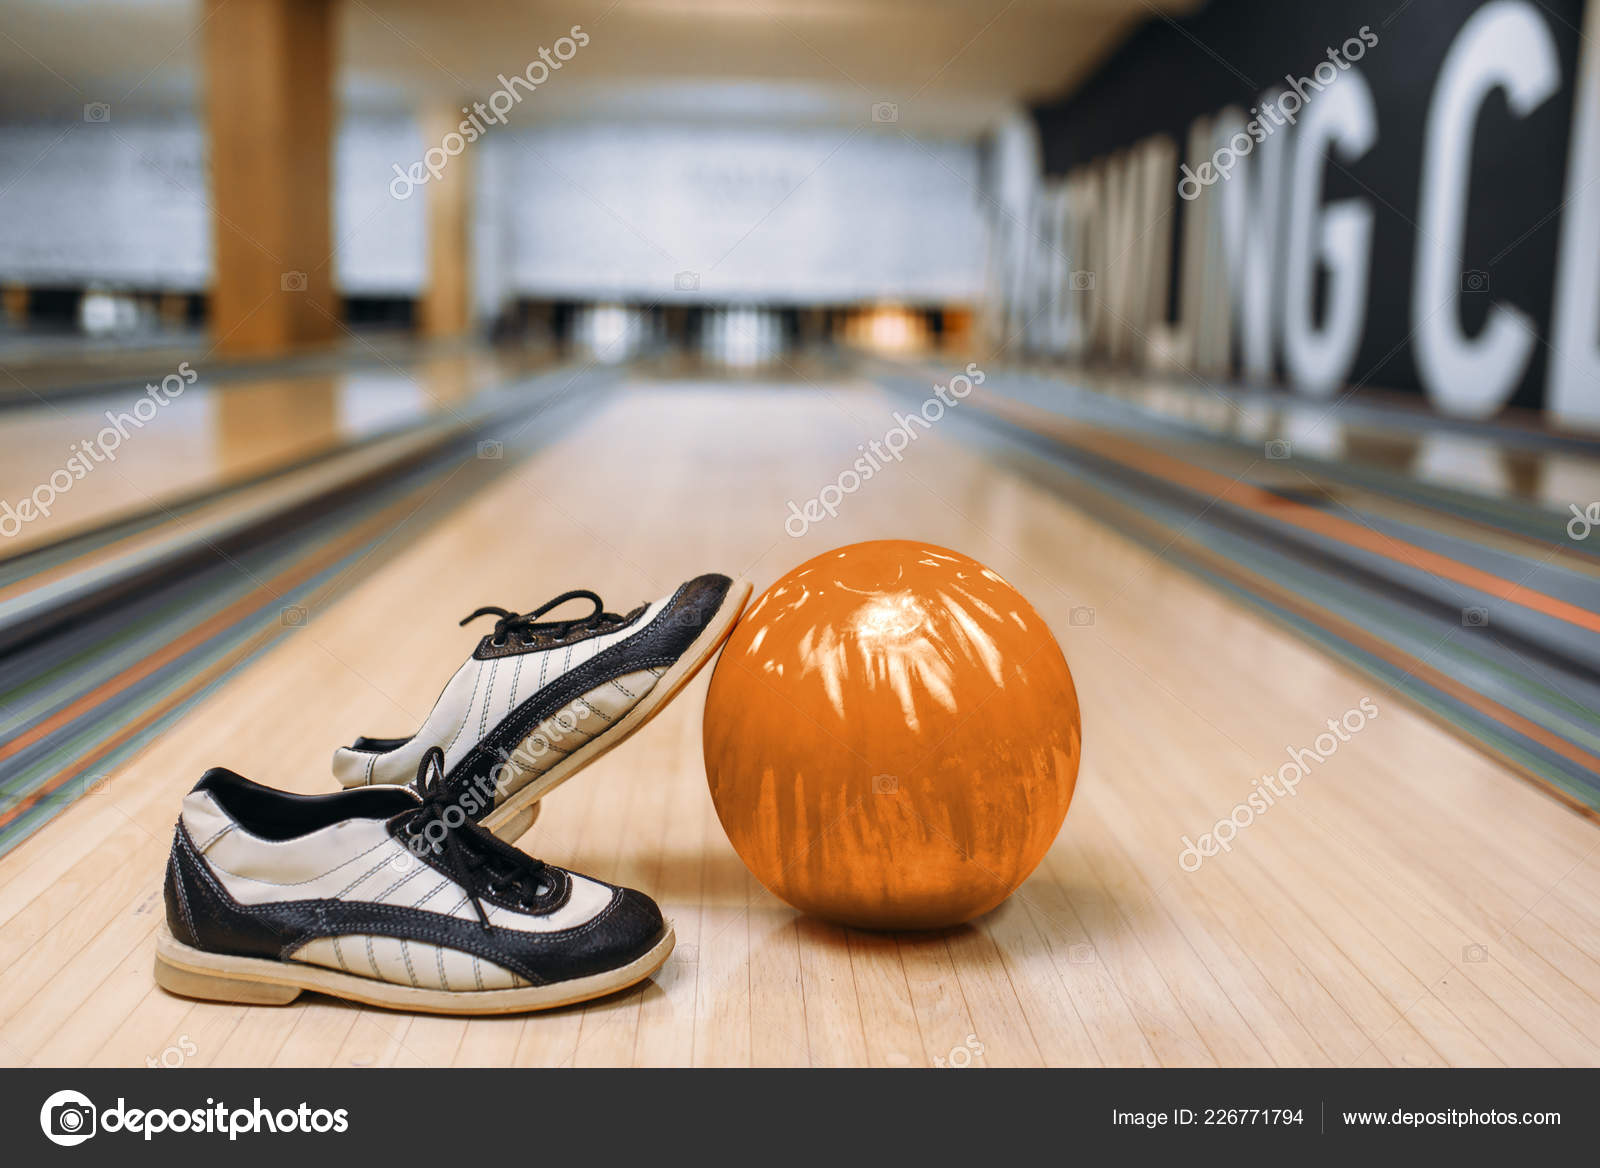 Bowling ball and house shoes on lane in club Stock Photo by NomadSoul1